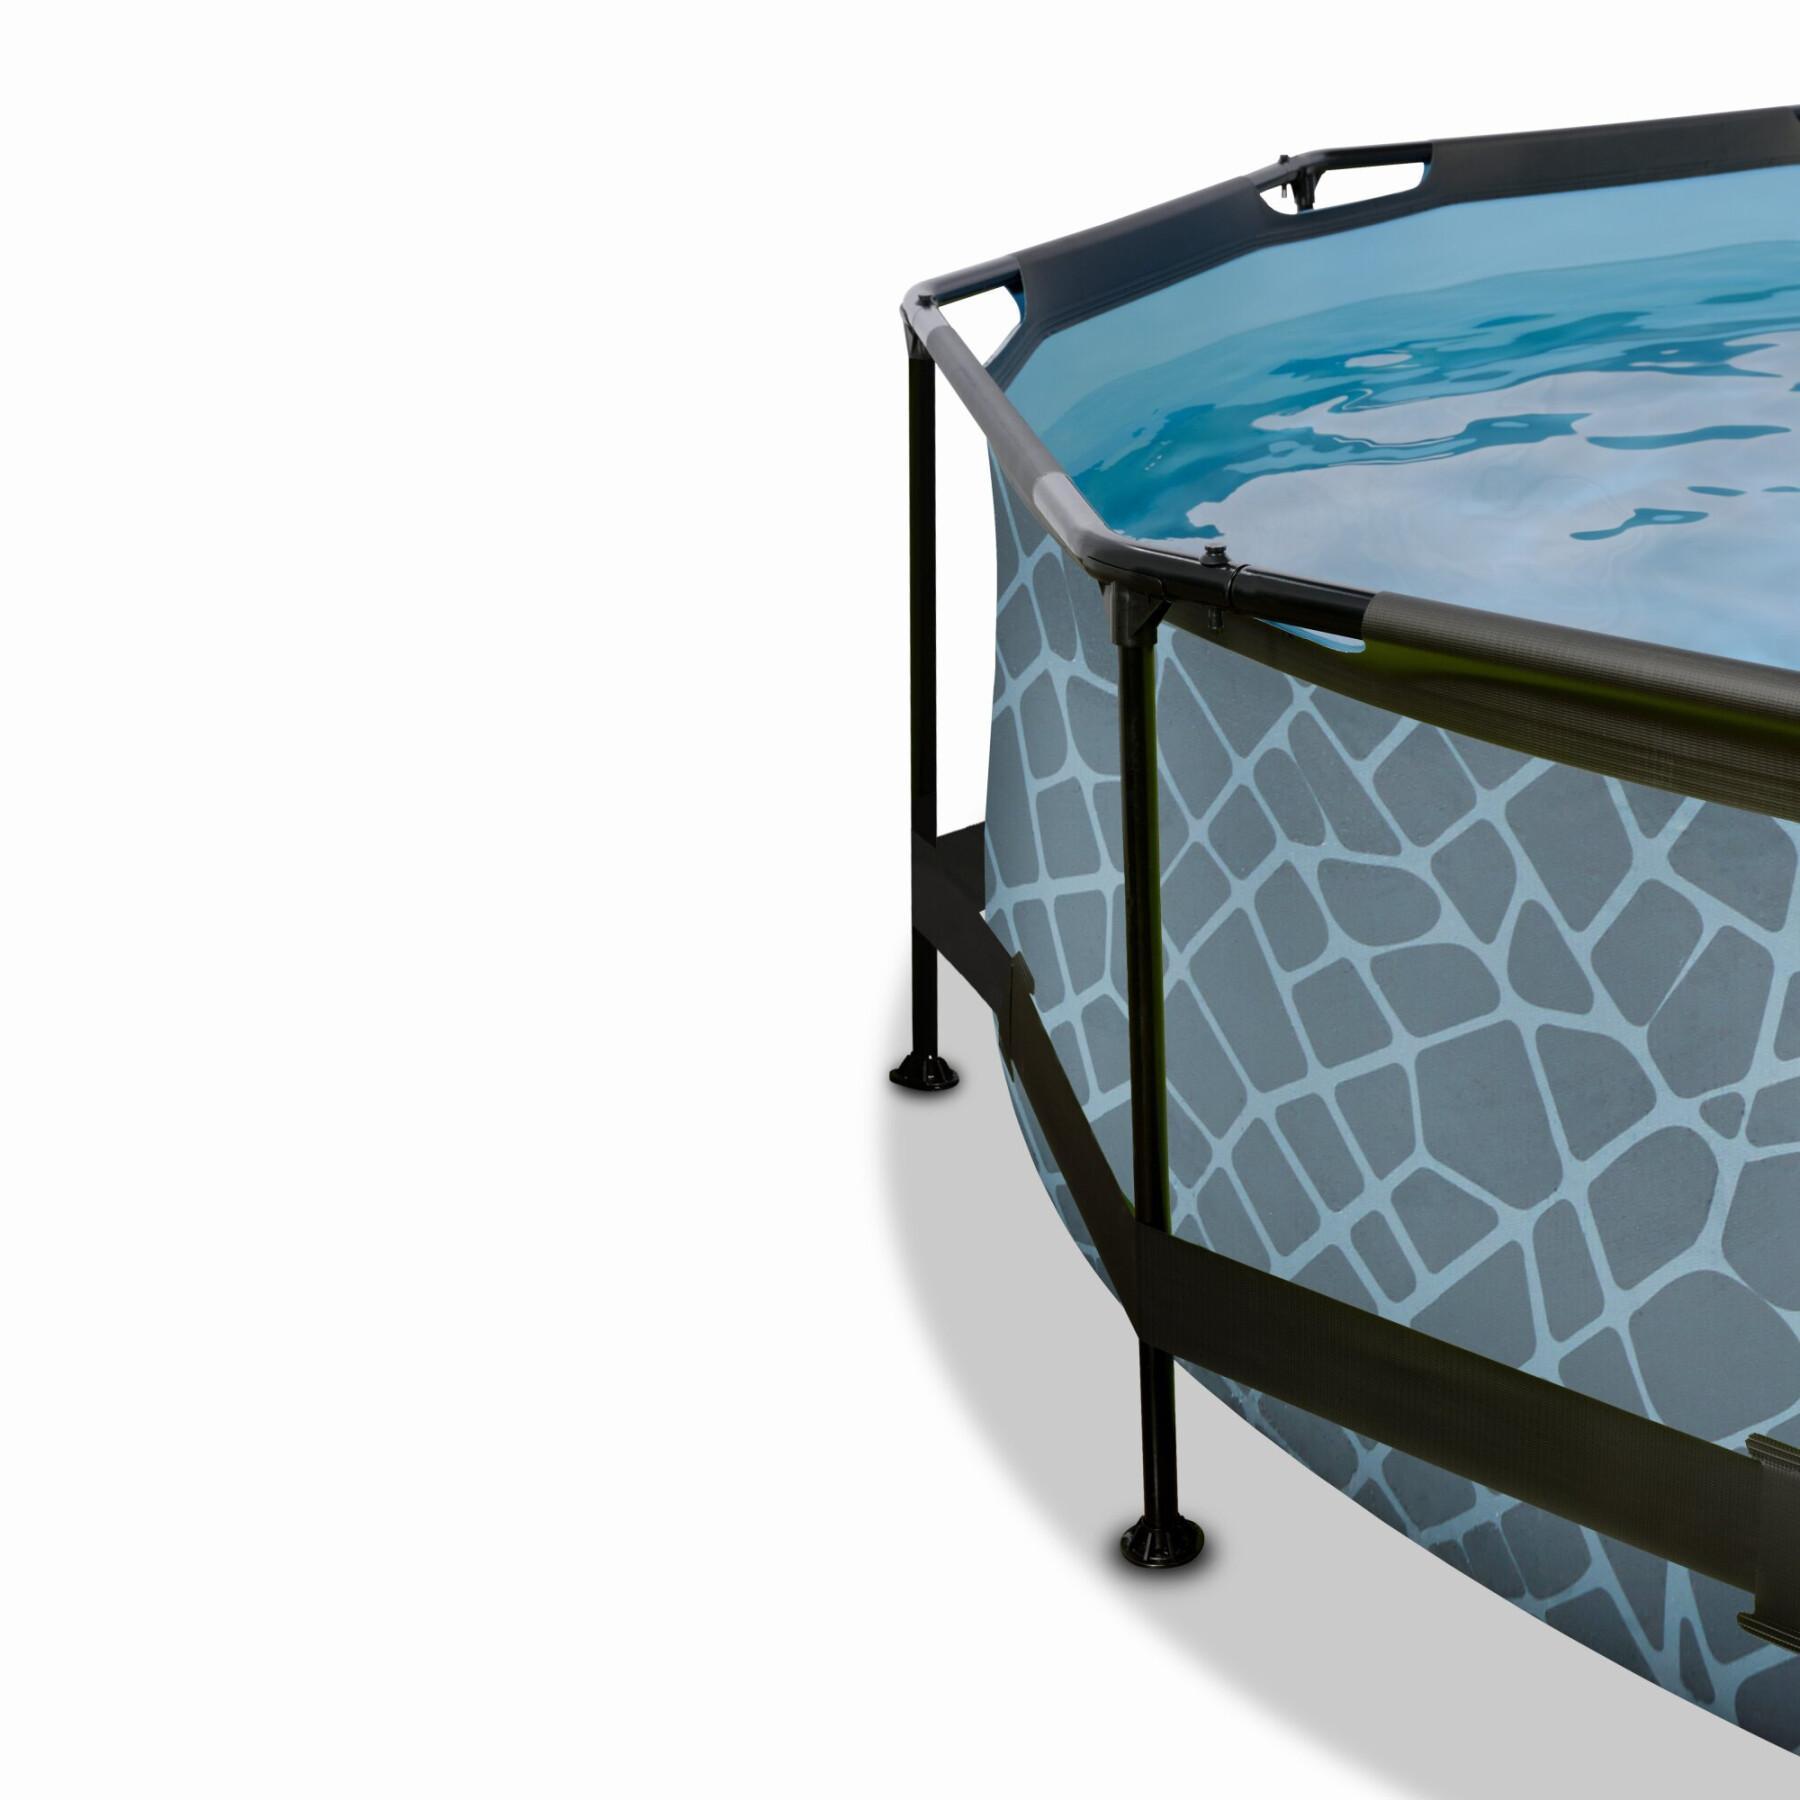 Swimming pool with filter pump and children's dome Exit Toys Stone 300 x 76 cm